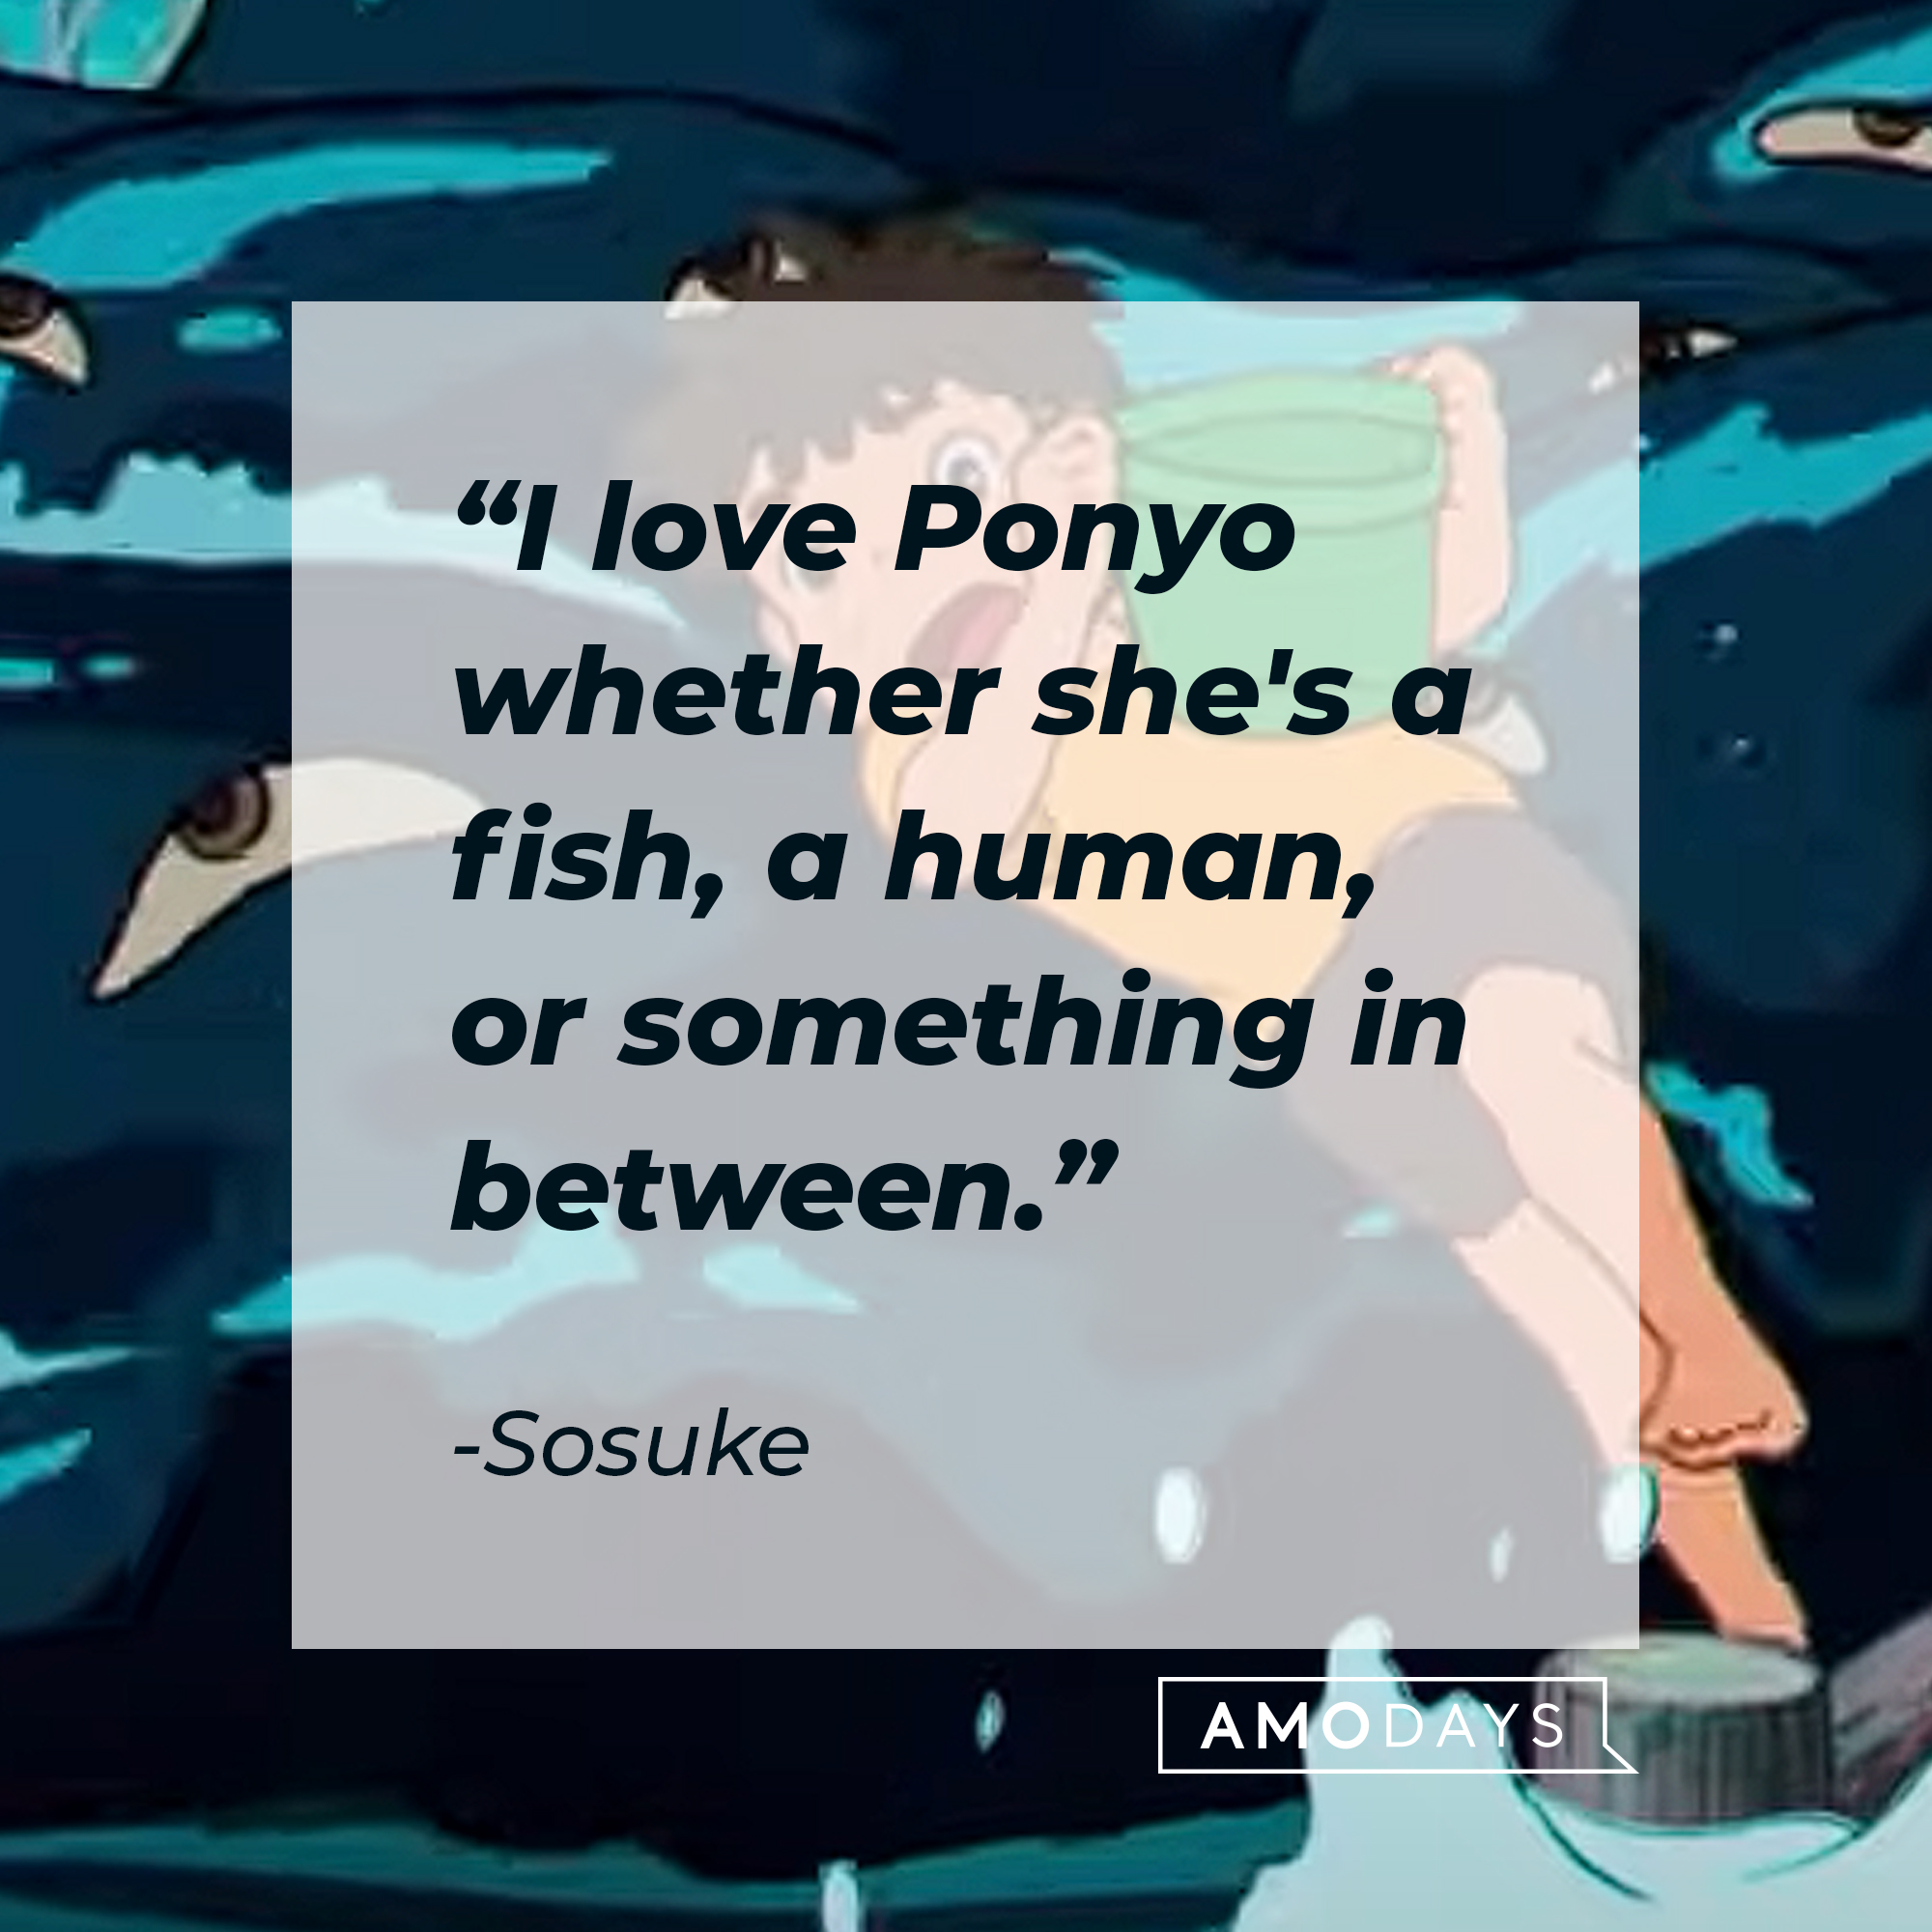 Sosuke's quote: "I love Ponyo whether she's a fish, a human, or something in between." | Source: Youtube.com/crunchyrollstoreau